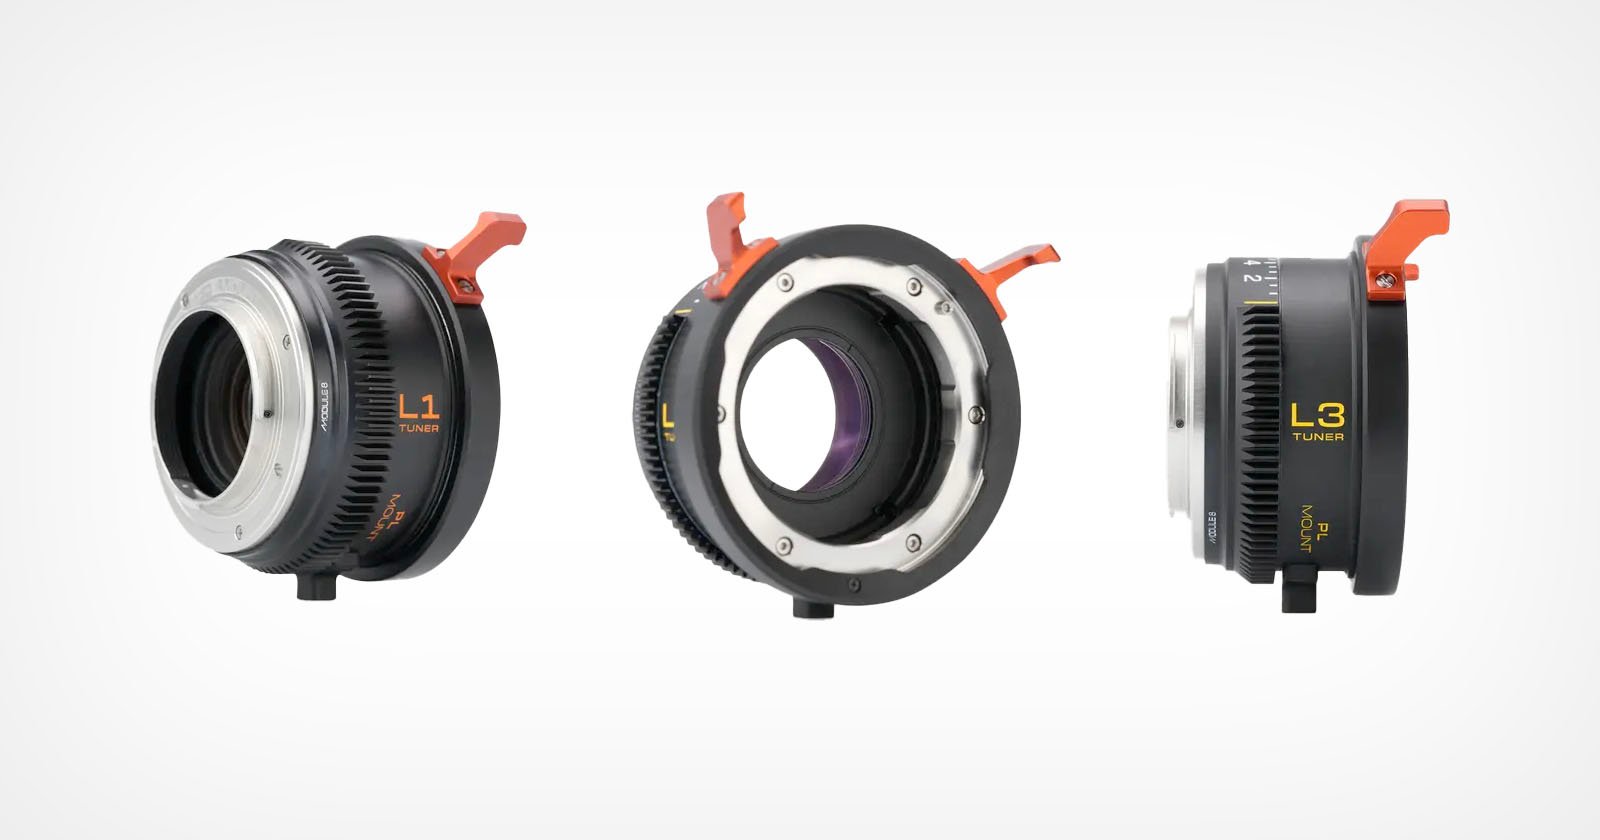 Module 8 Tuner Now Available for PL Lenses, Bringing Variable Vintage Style to More Users